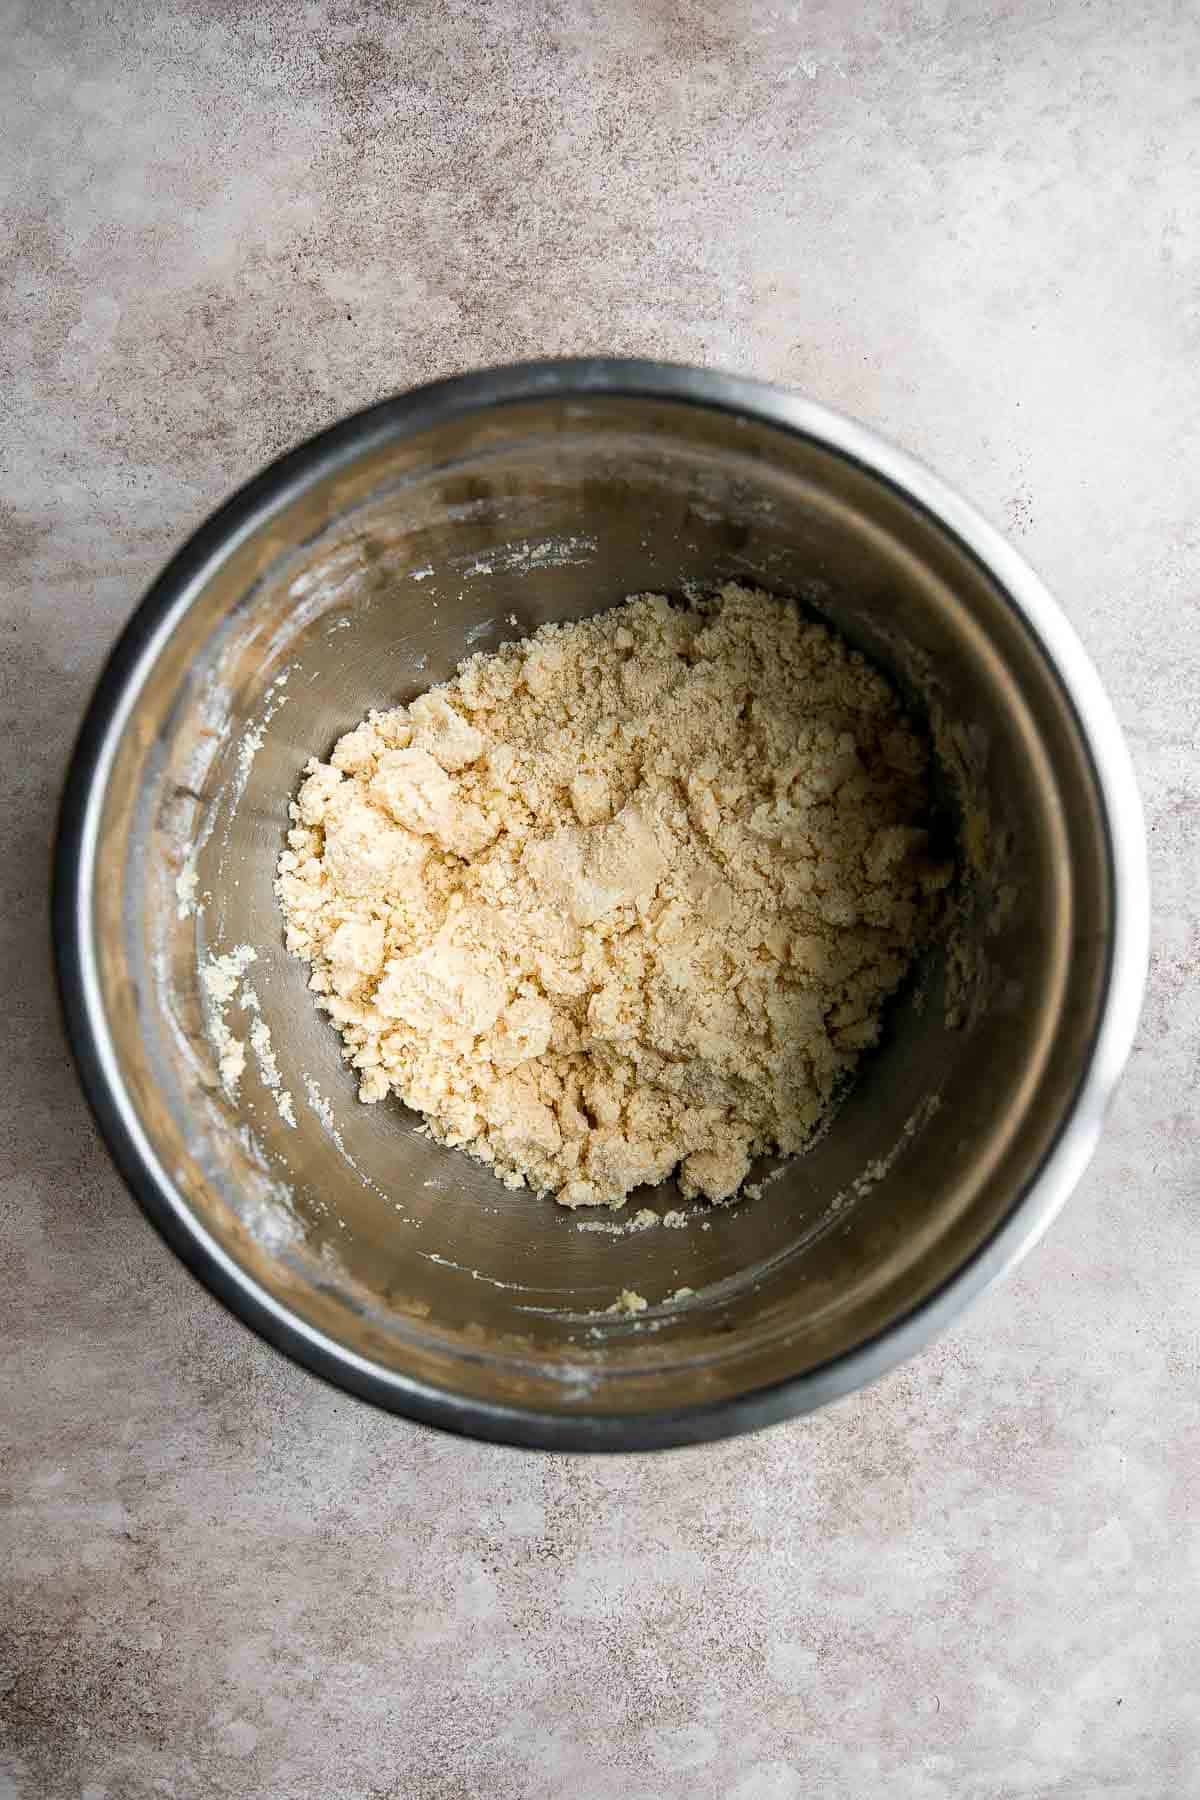 These sweet, crisp, buttery, classic Shortbread Cookies are so light that they practically dissolve in your mouth. They’re easy to make with 5 ingredients. | aheadofthyme.com